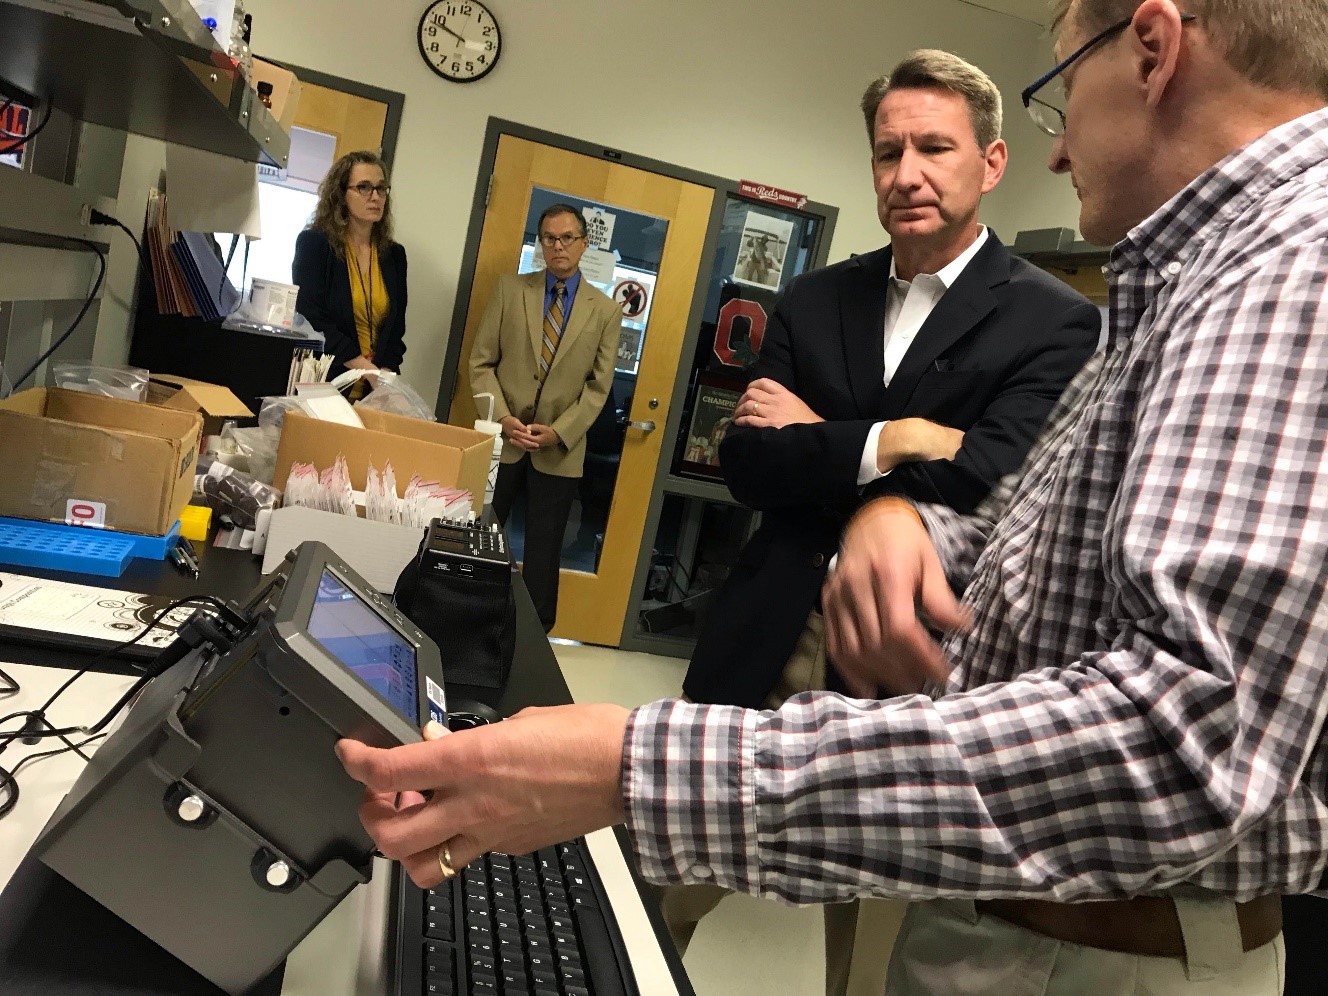 Acting FDA Commissioner Ned Sharpless, M.D. takes a tour of the FDA’s Forensic Chemistry Center. The Center serves as the FDA’s premier national laboratory and is playing a critical role in fact-gathering and analysis for the ongoing incidents of lung illnesses following vaping product use.